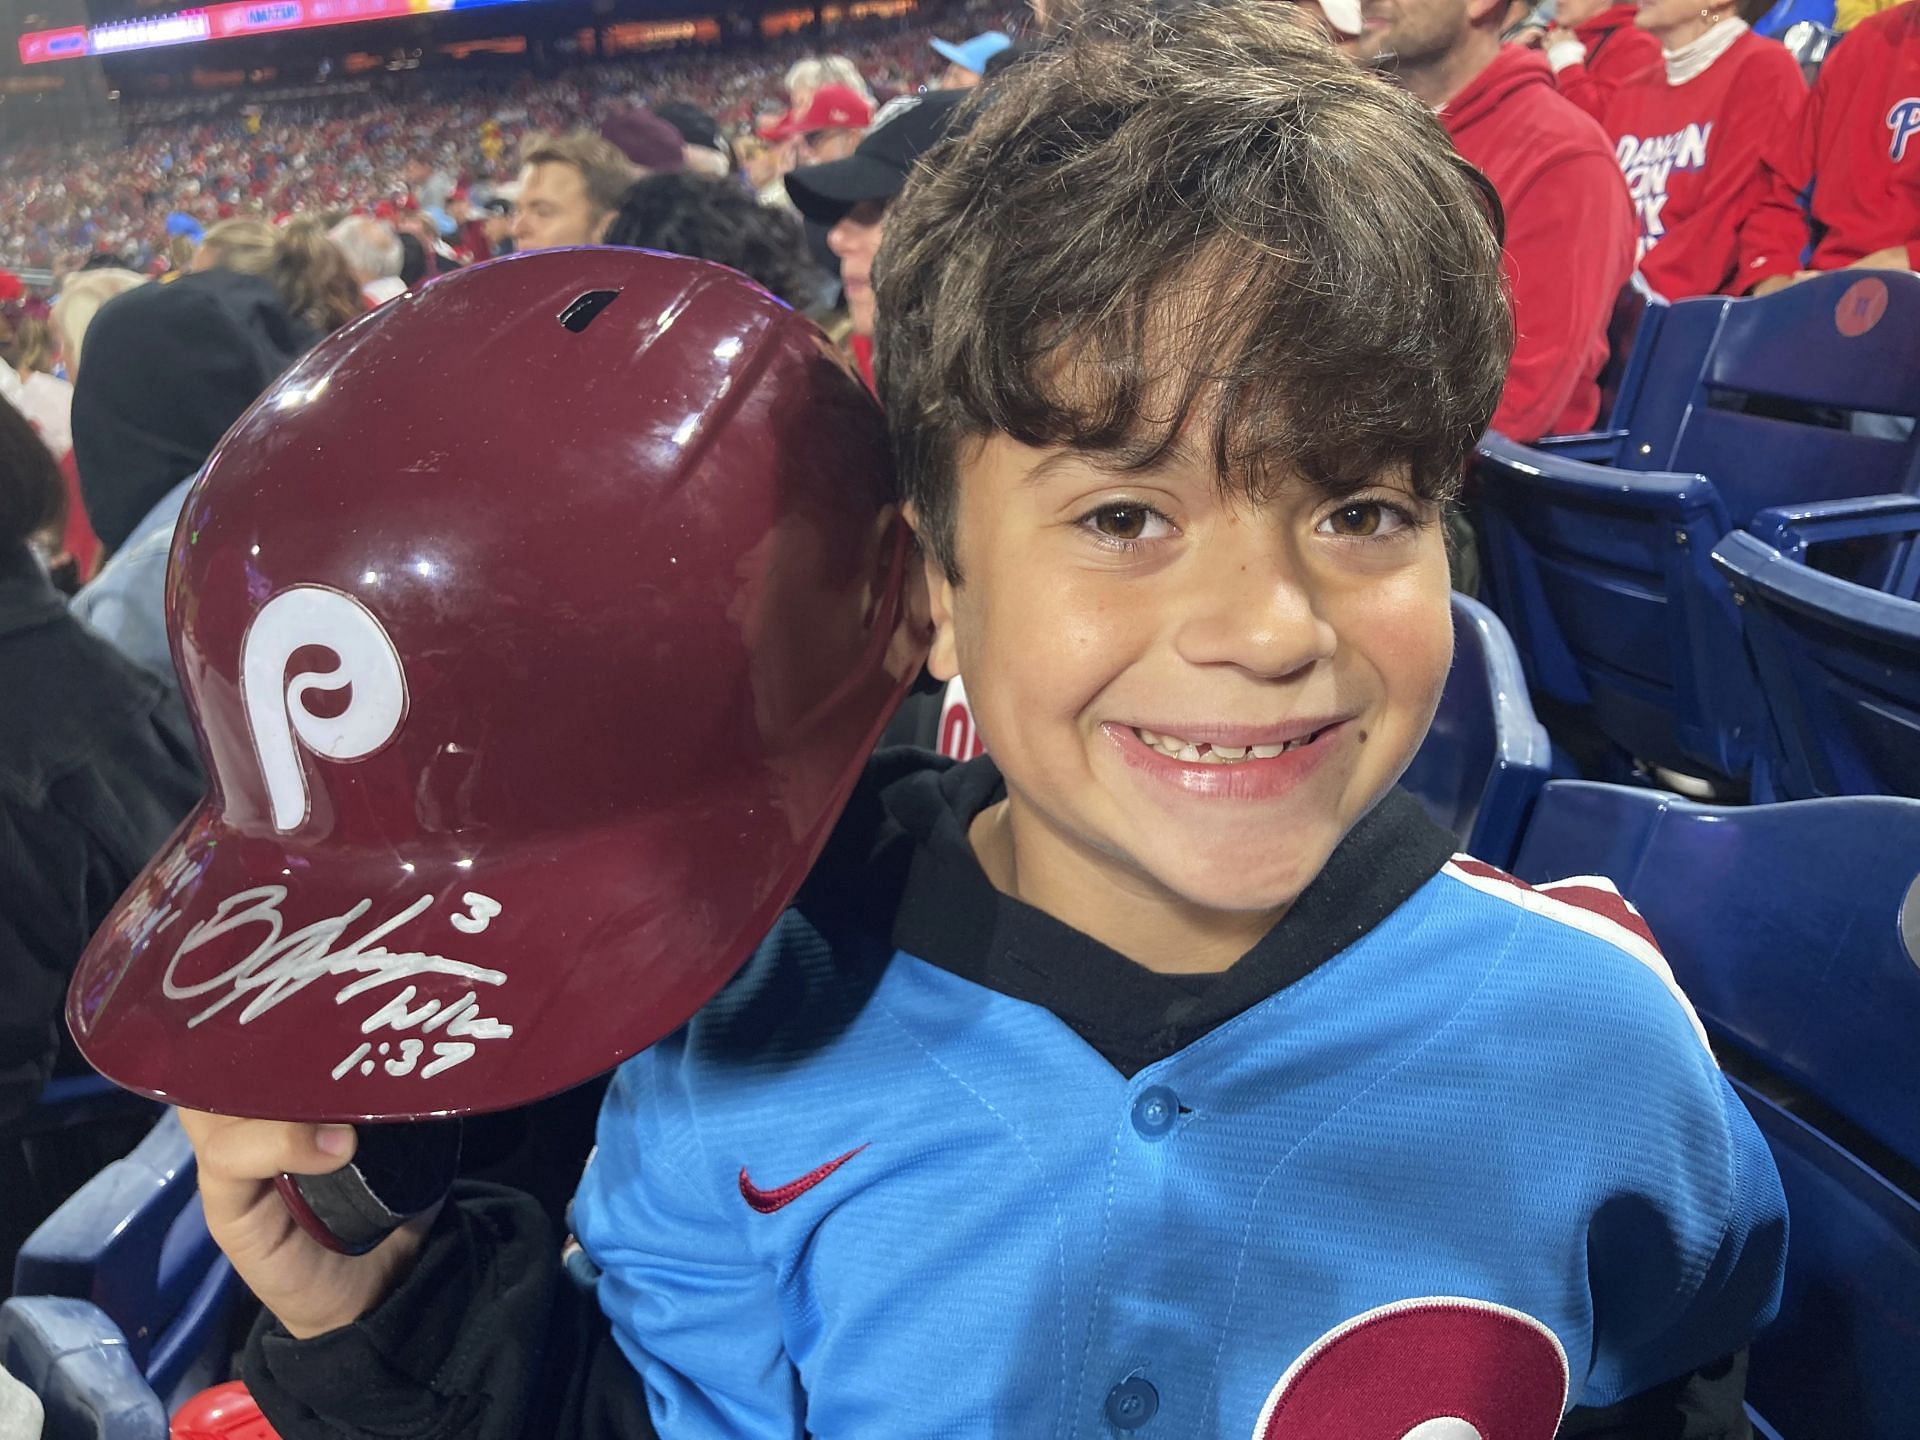 With the help of security guards, Bryce Harper signed the helmet with a personal message for Hayden.